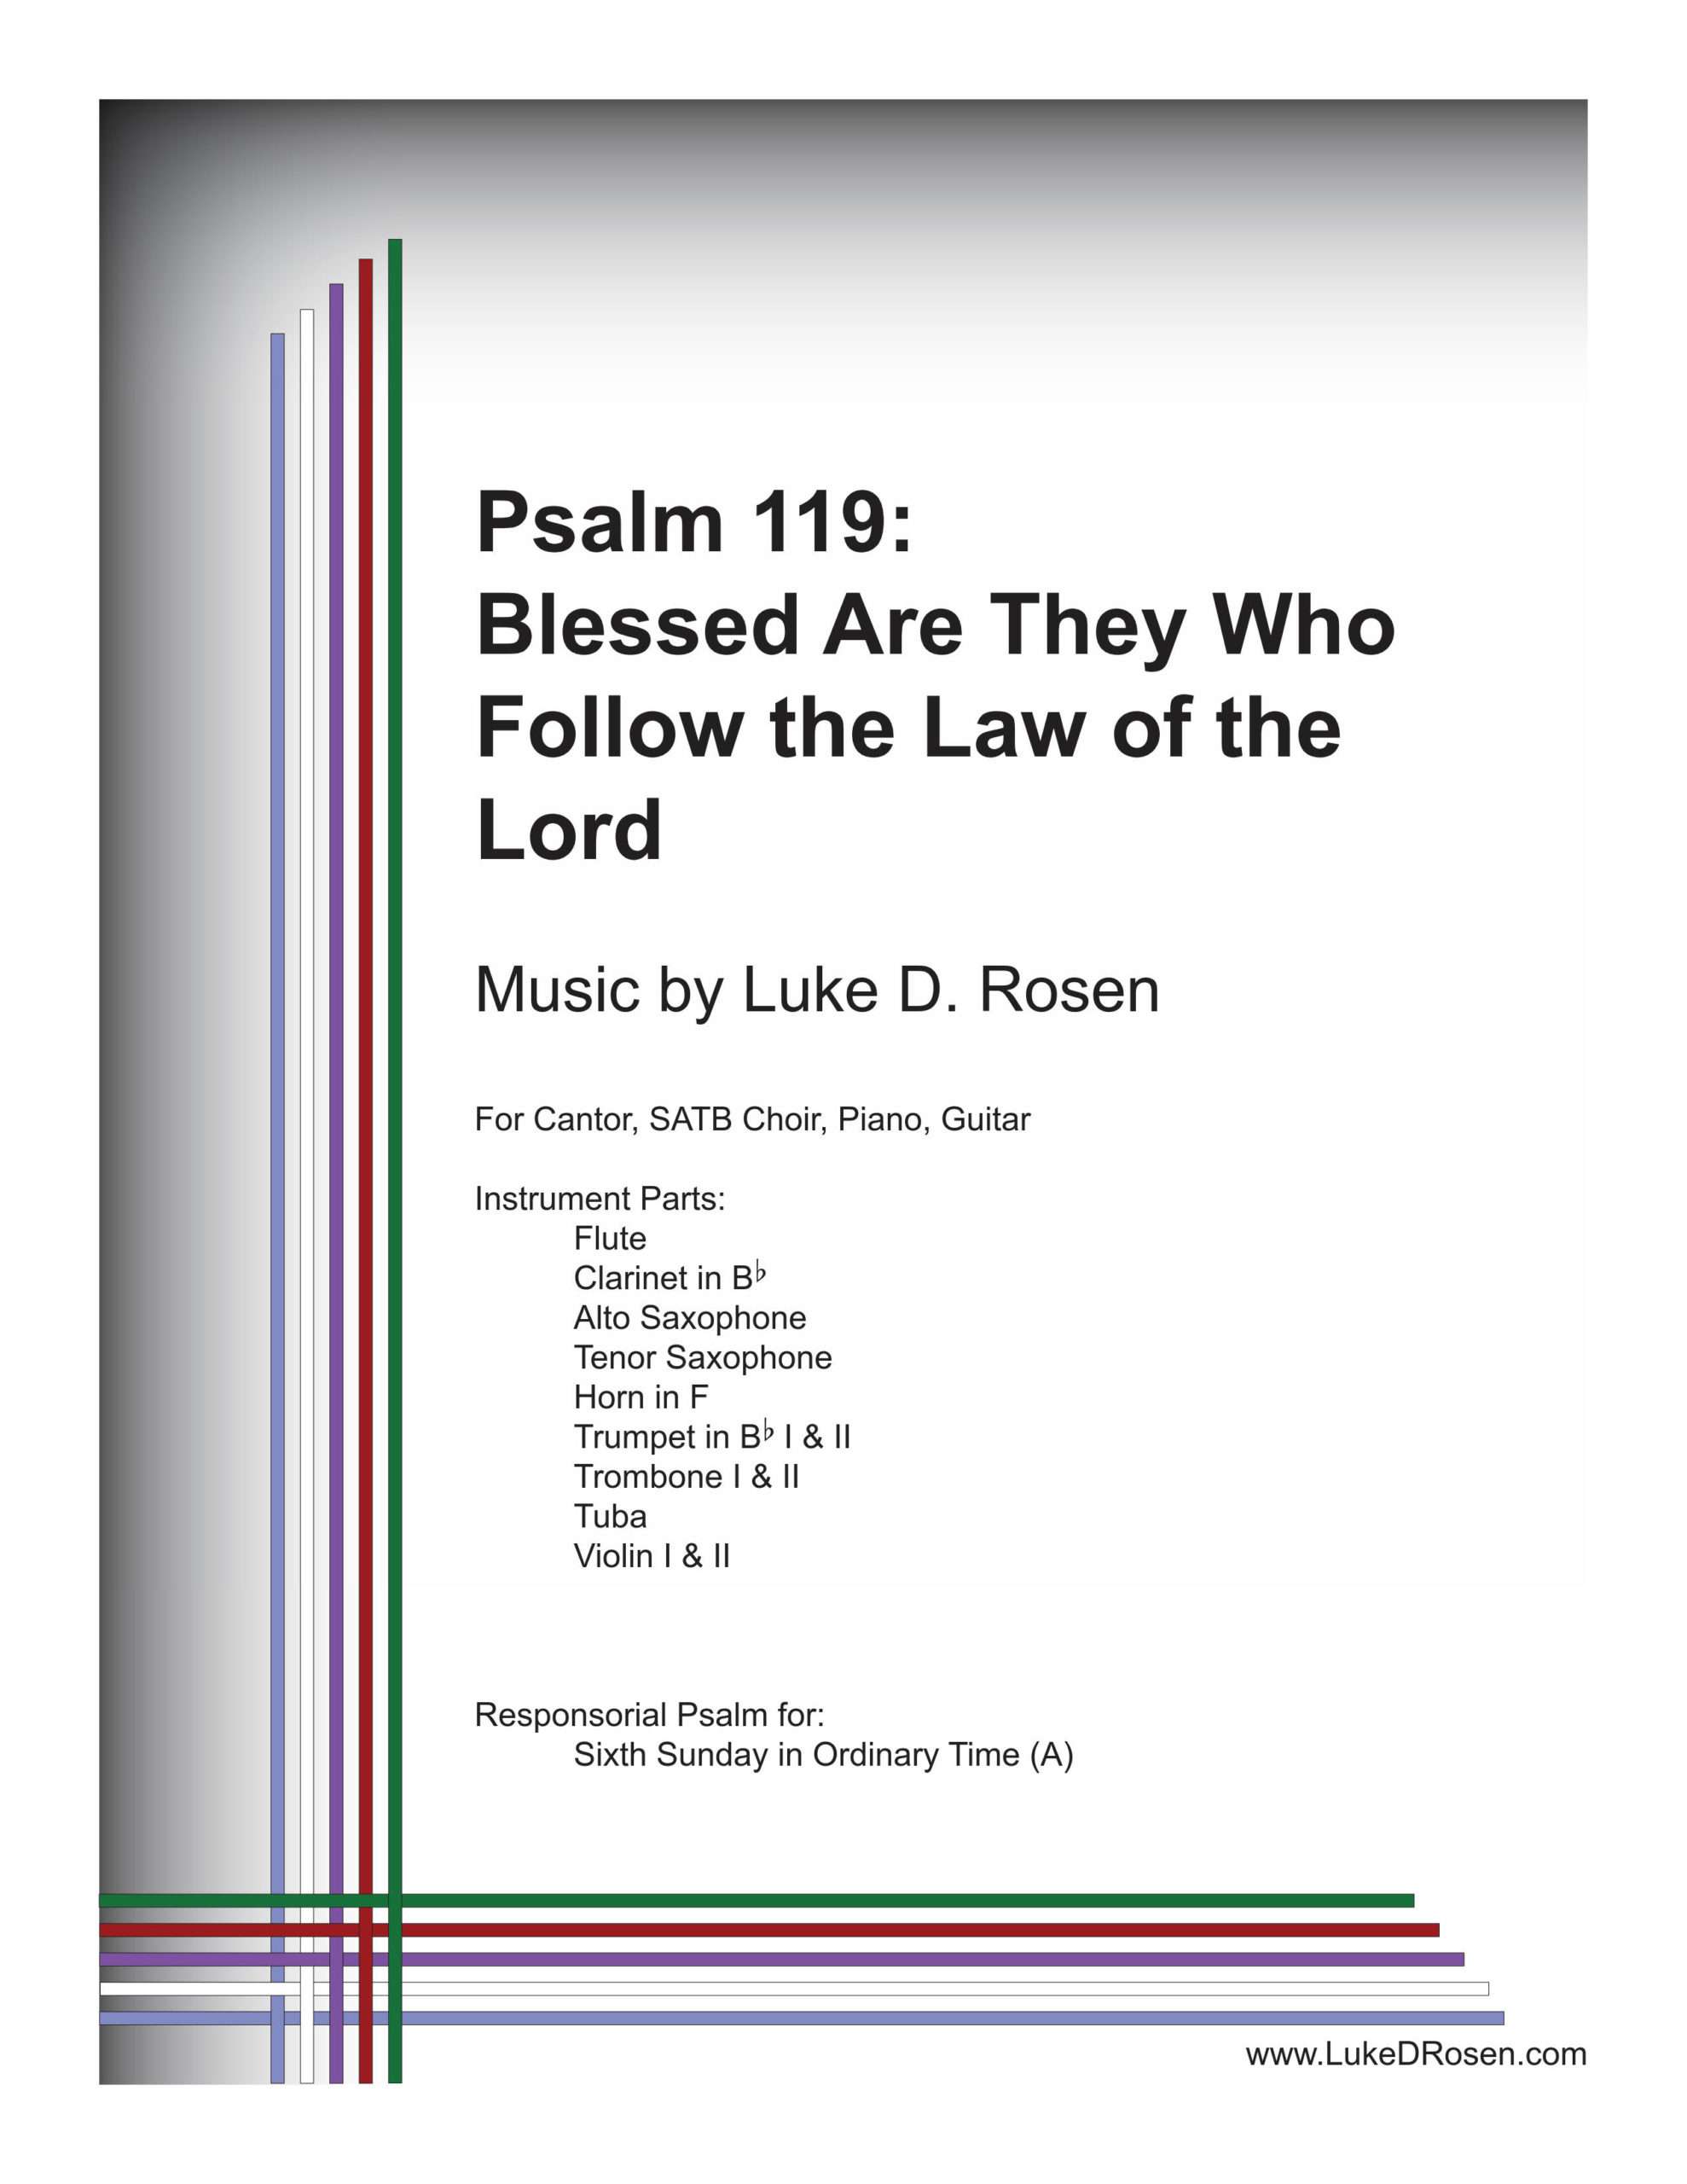 Psalm 119 – Blessed Are They Who Follow the Law of the Lord (Rosen)